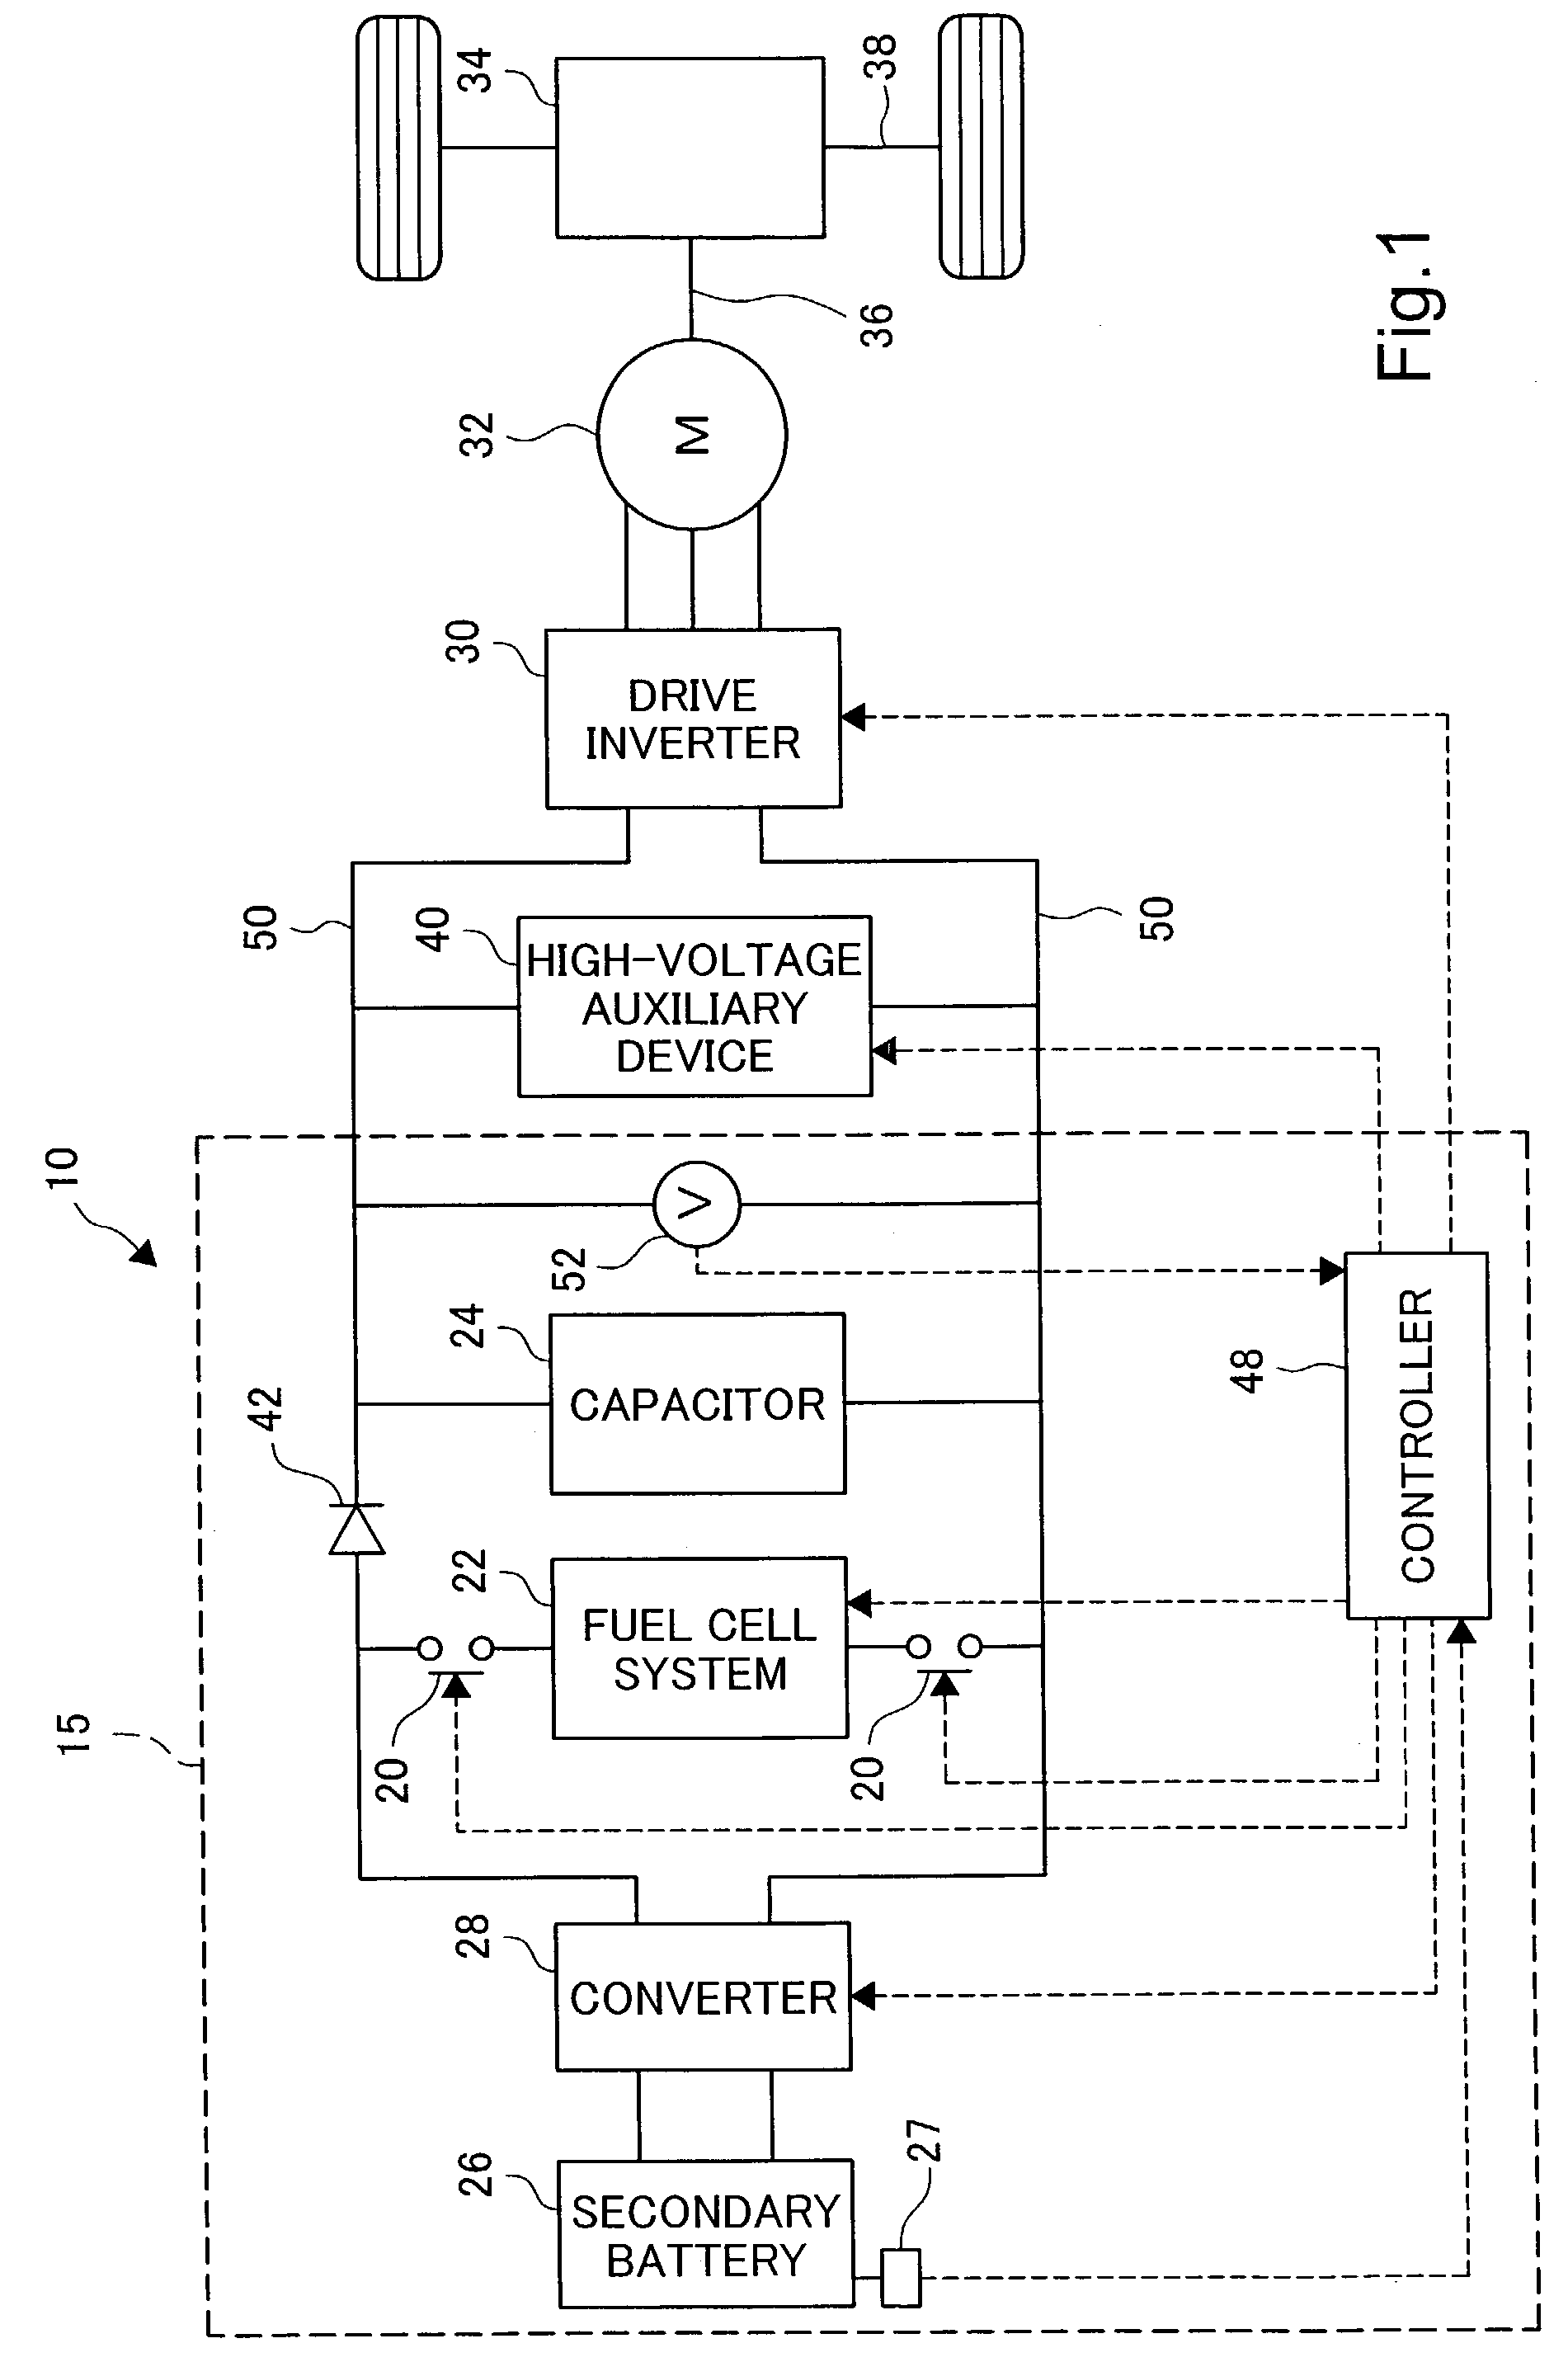 Power supply apparatus including fuel cell and capacitor, and operation method thereof